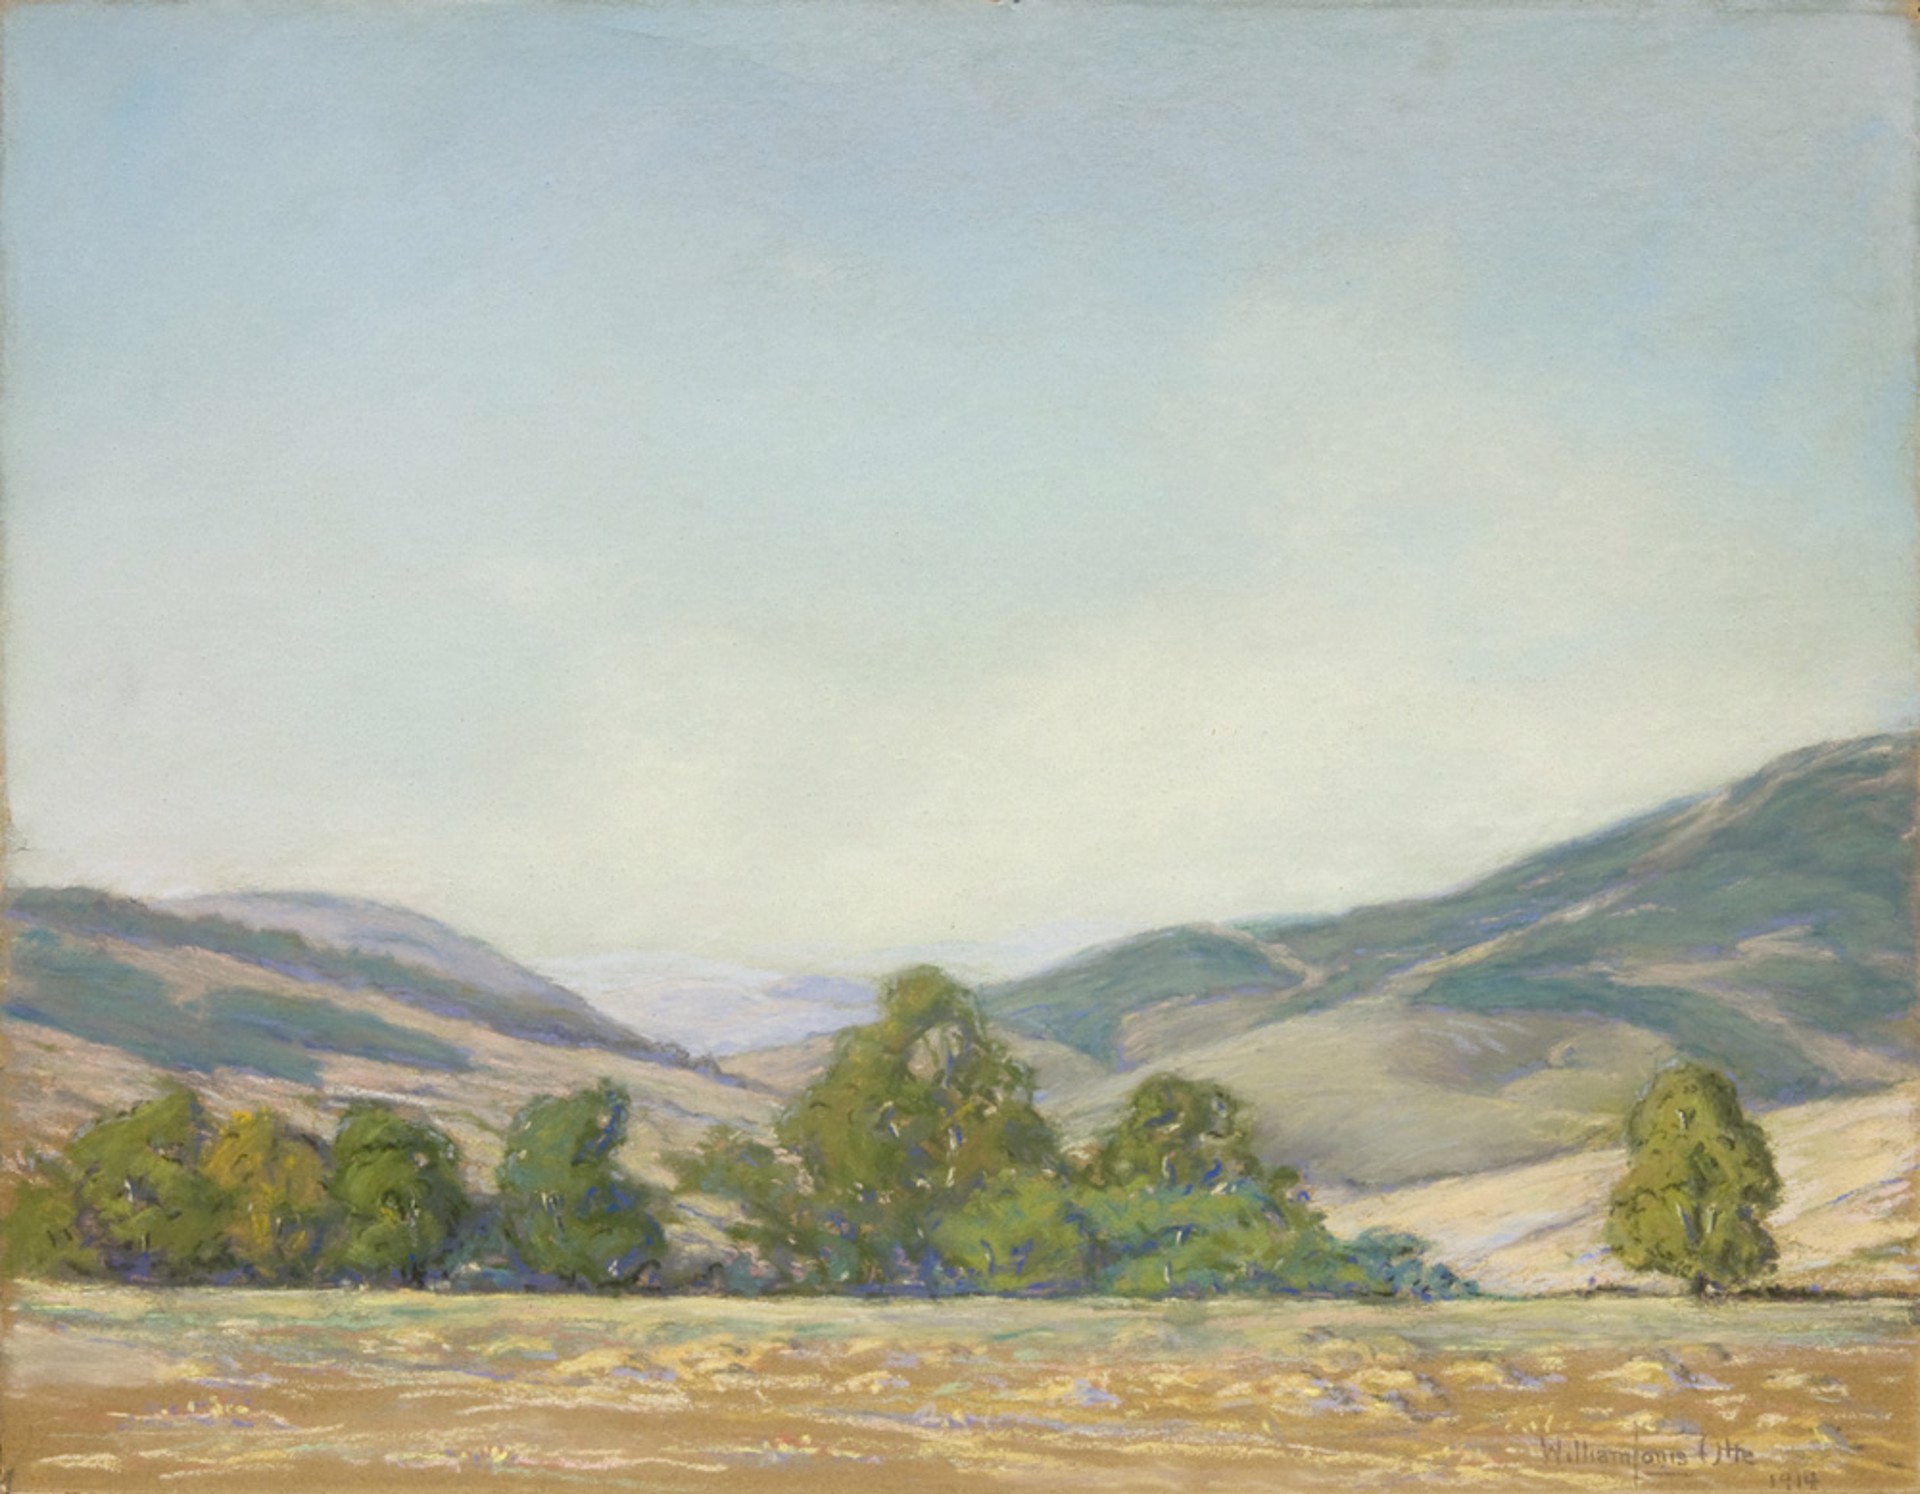 Cuesta Canyon in Nojoqui County, August, 1914 by William Otte